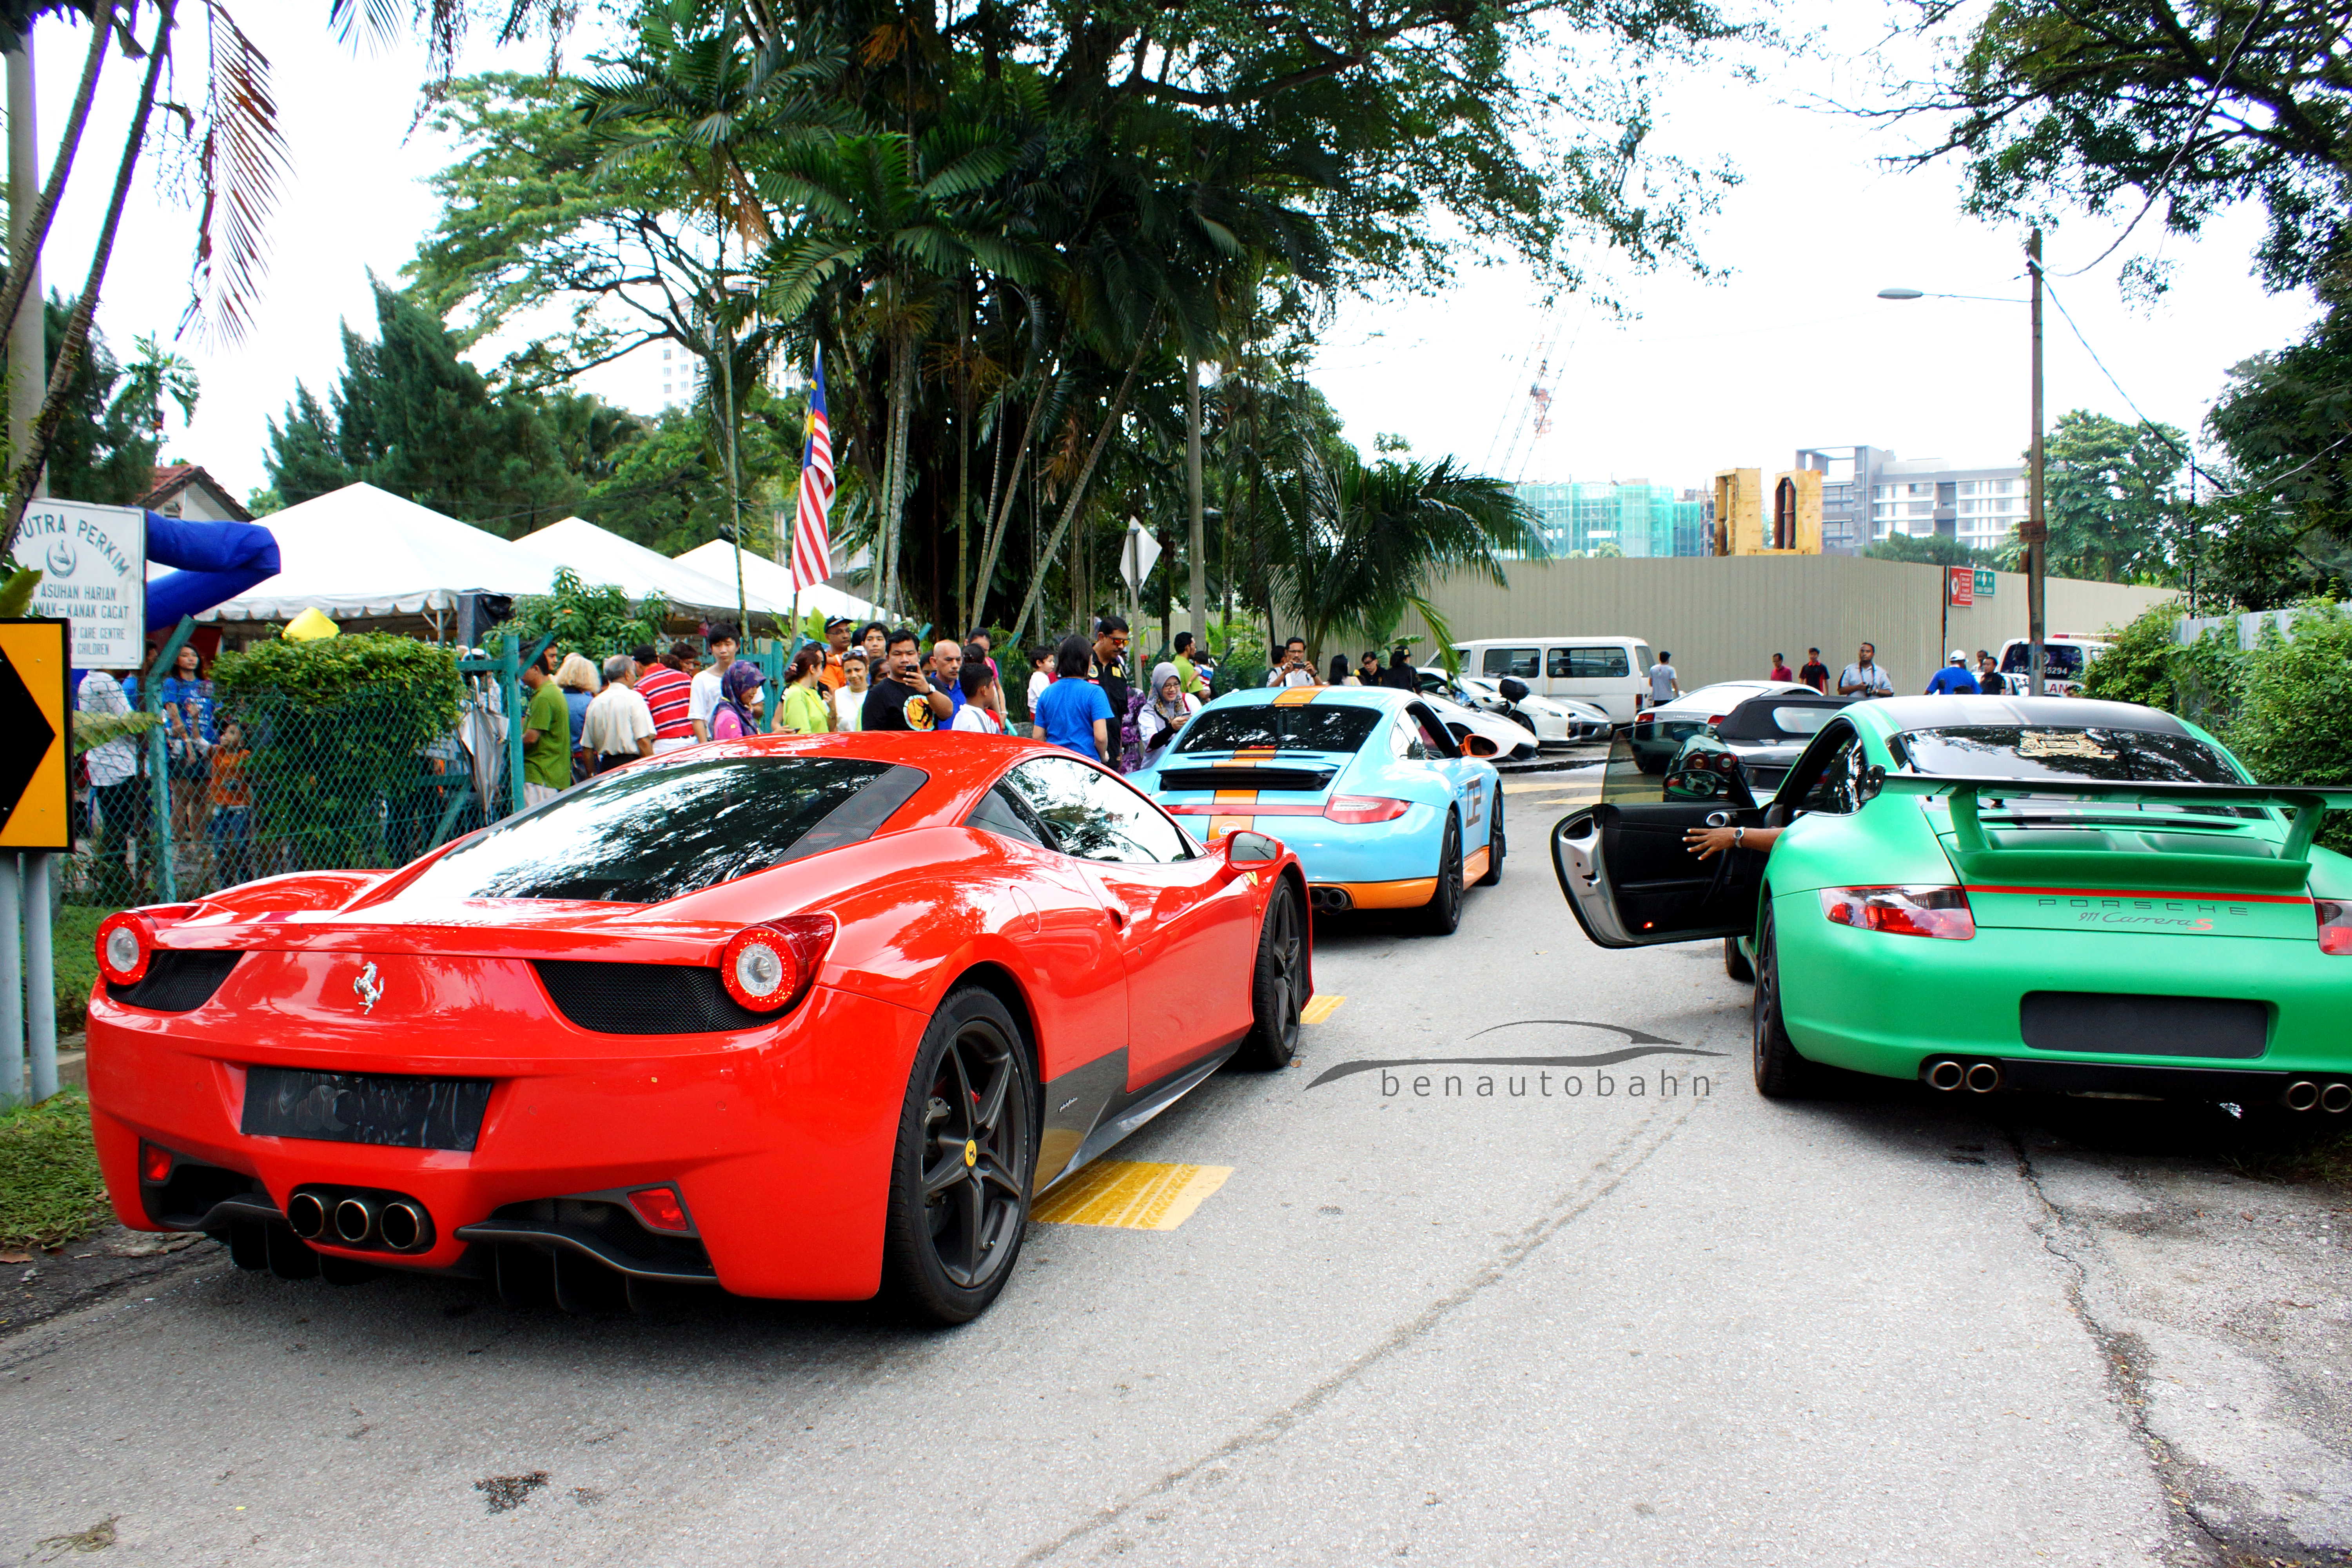 Supercar charity event